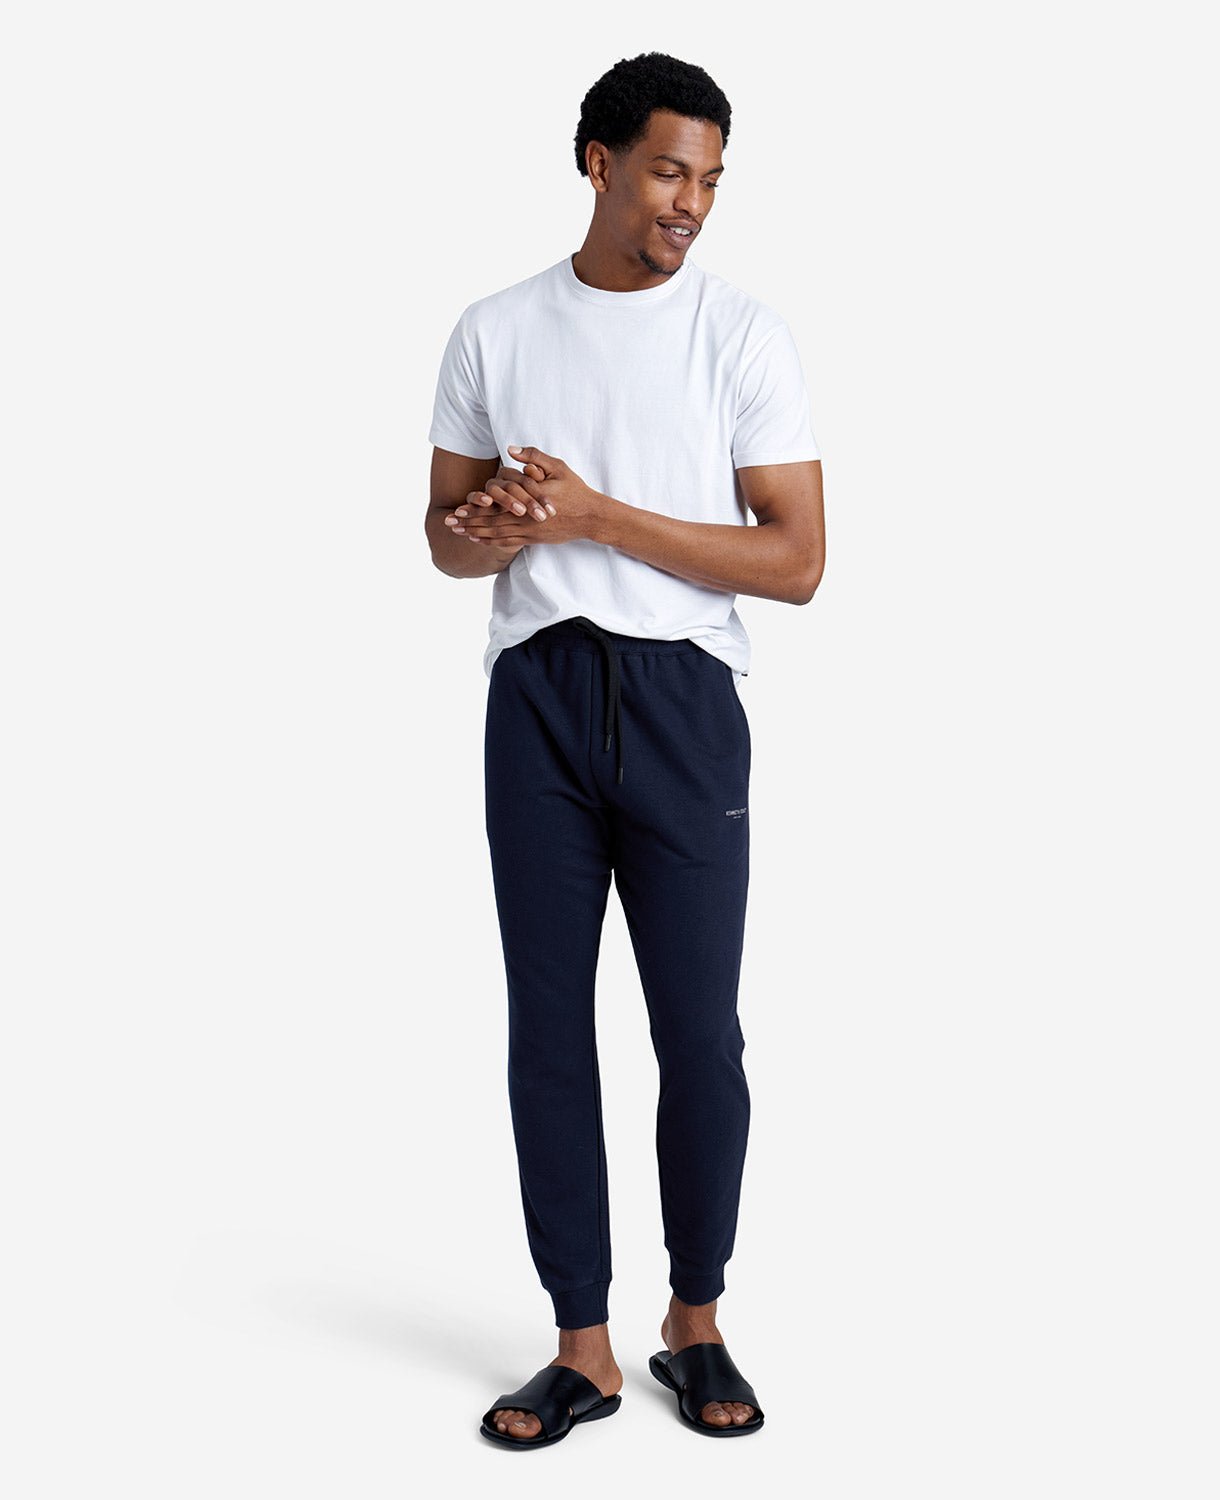 How to Wear Jogger Outfits for Men: Comfort Meets Fashion